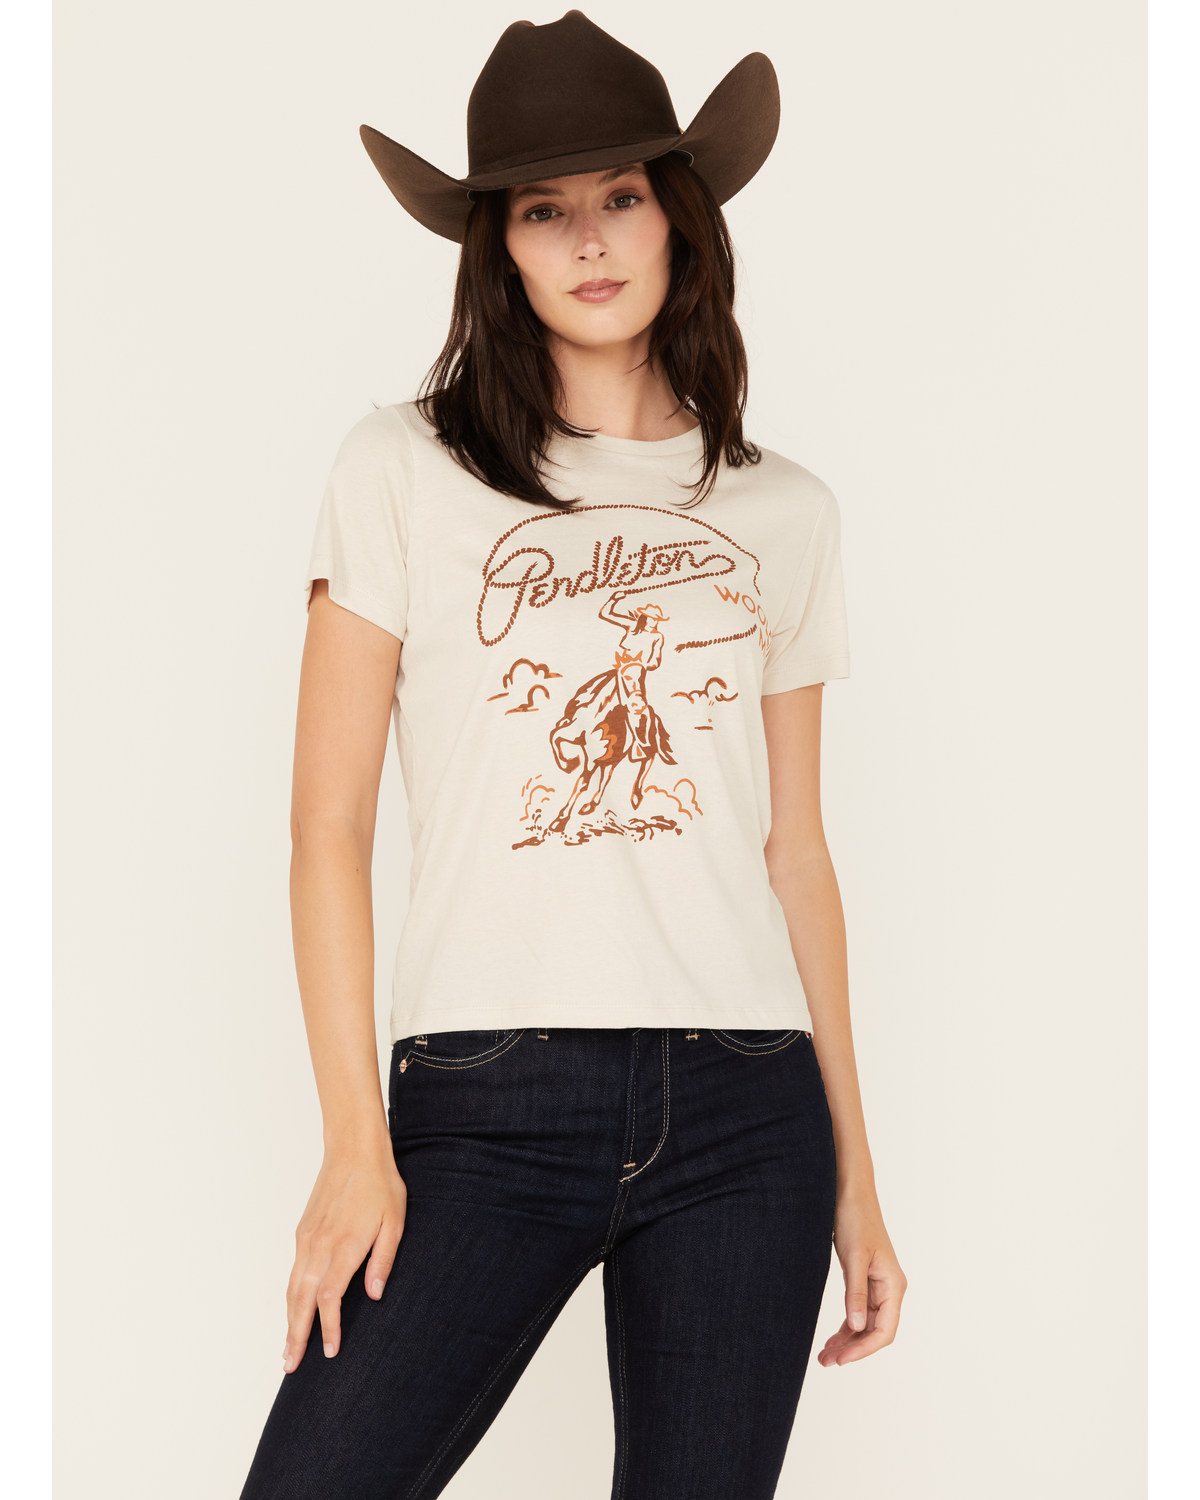 Pendleton Women's Rodeo Cowgirl Graphic Tee